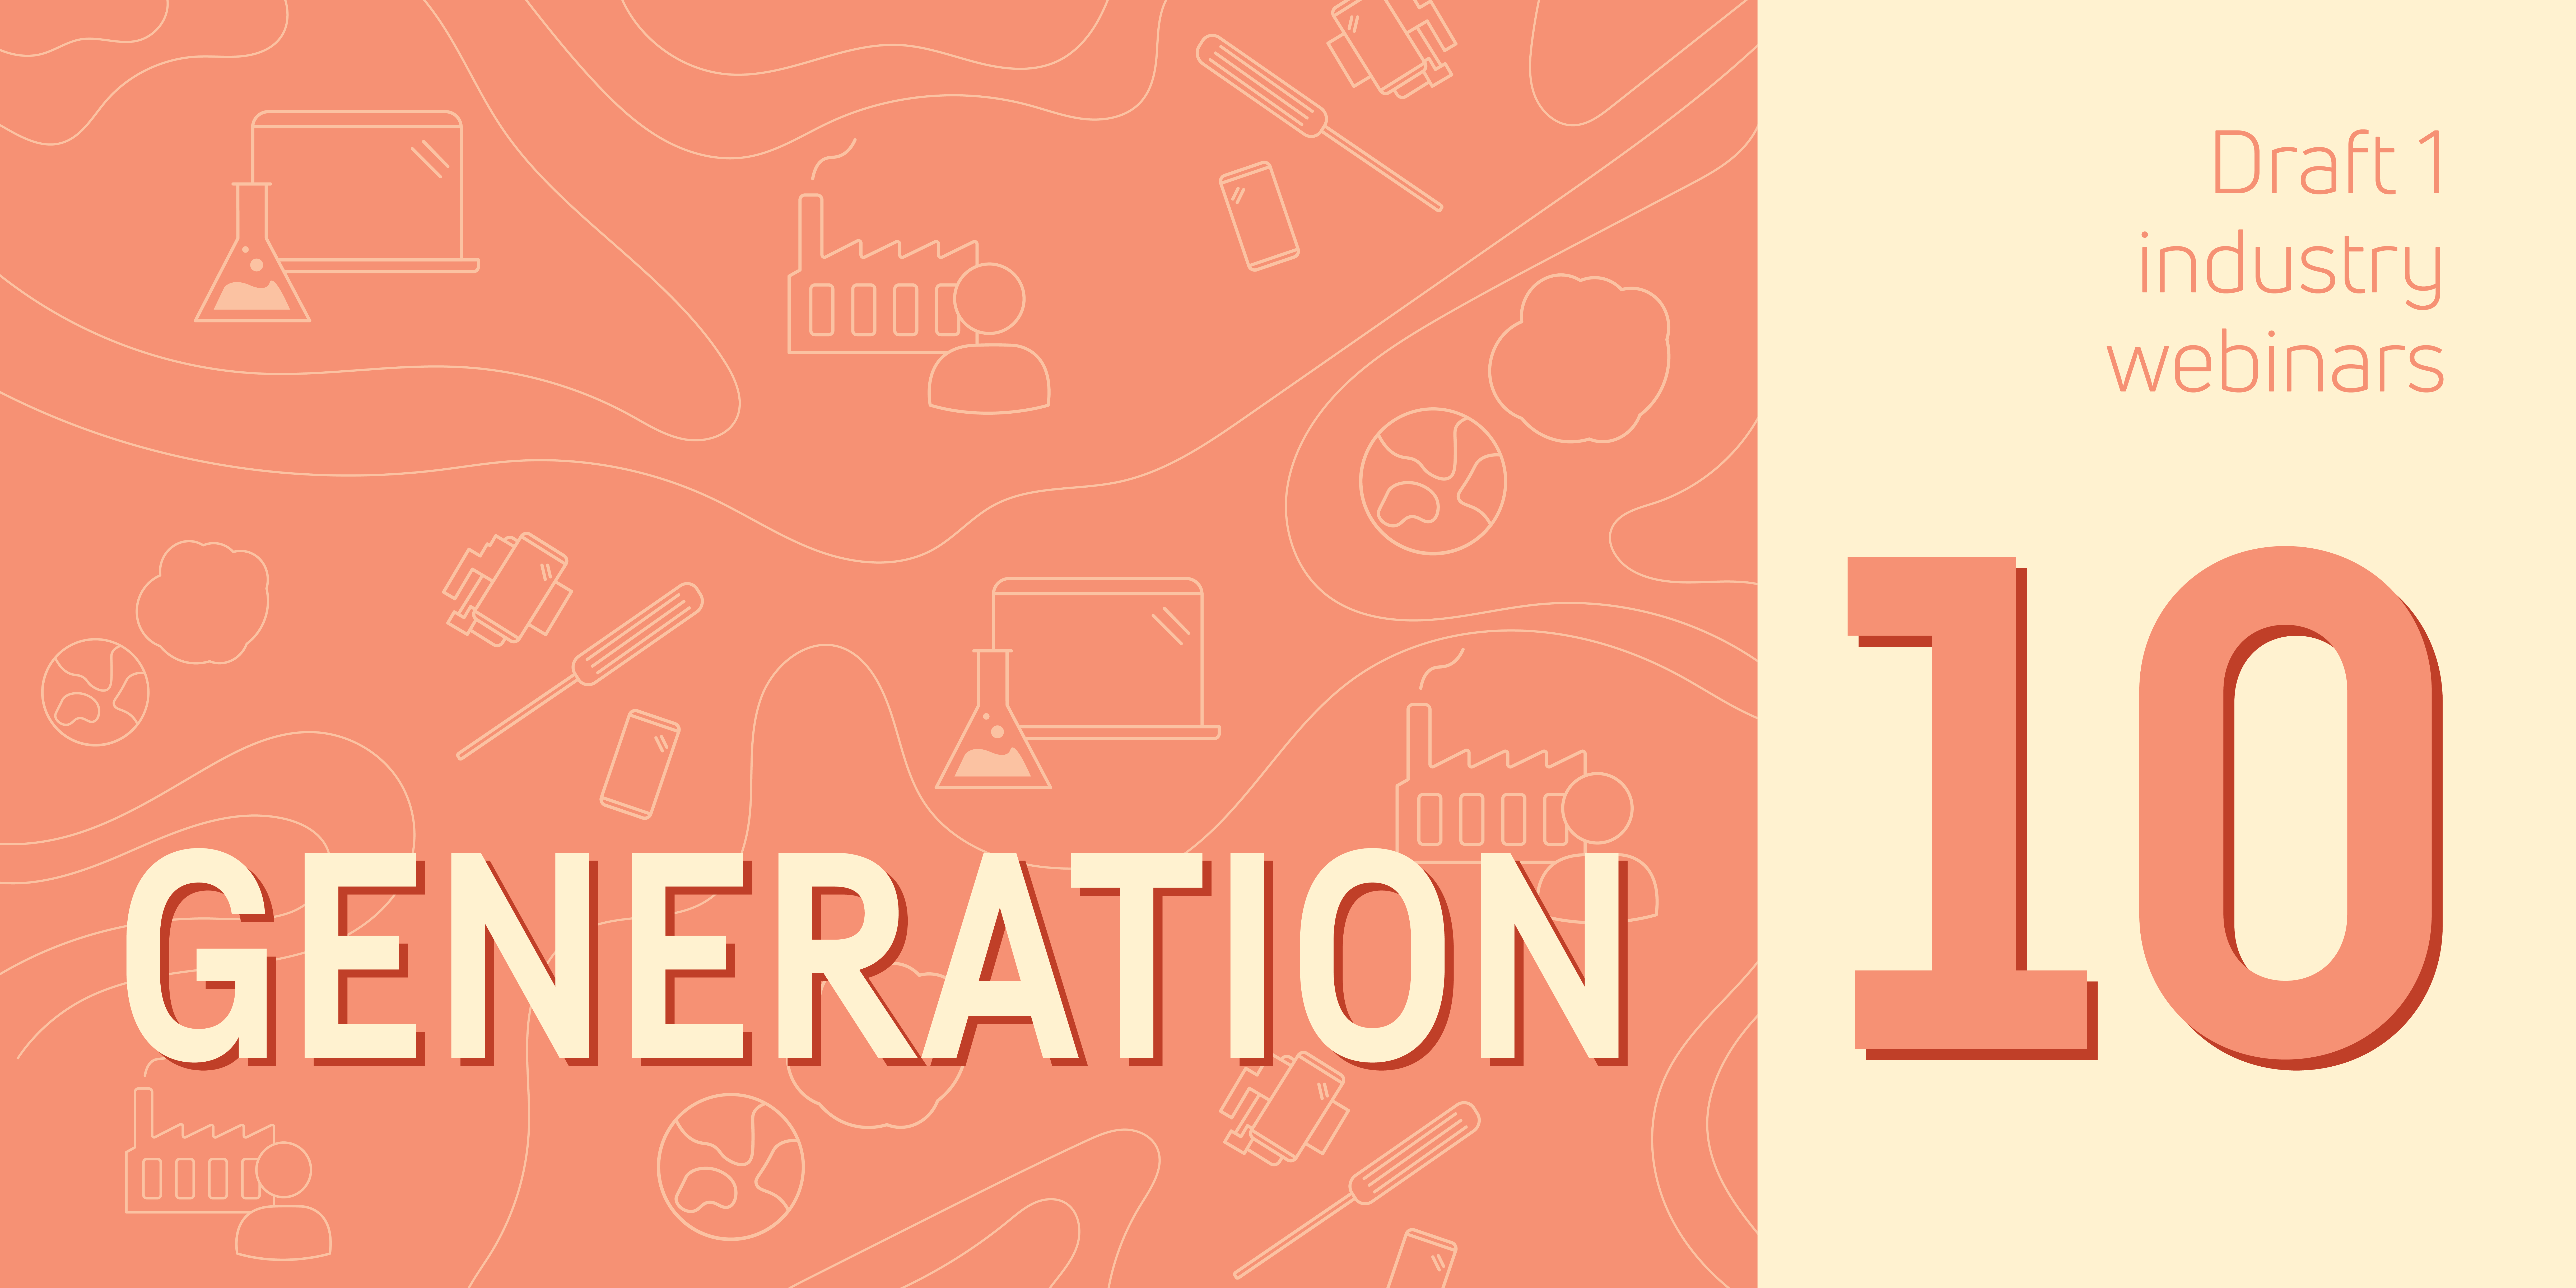 Webinar: presenting the first draft of TCO Certified, generation 10